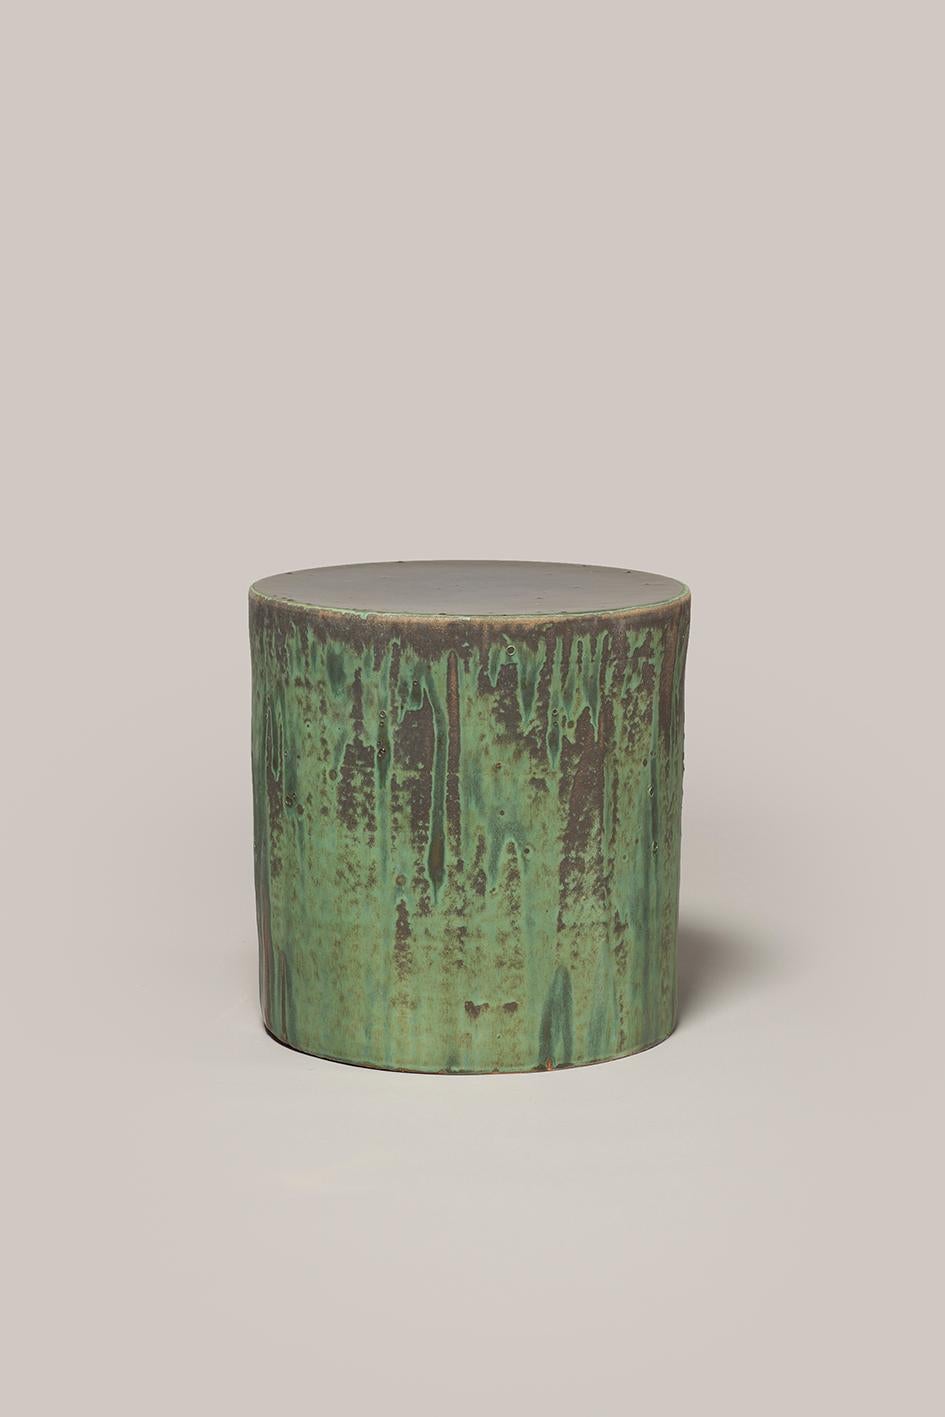 Handmade stoneware side table manufactured at the workshop of Apparatu in Barcelona. Different clay bodys are mixed with natural fibers like corn, straw, or heather straw. The pieces are casted by hand, creating a thick and strong clay structure.